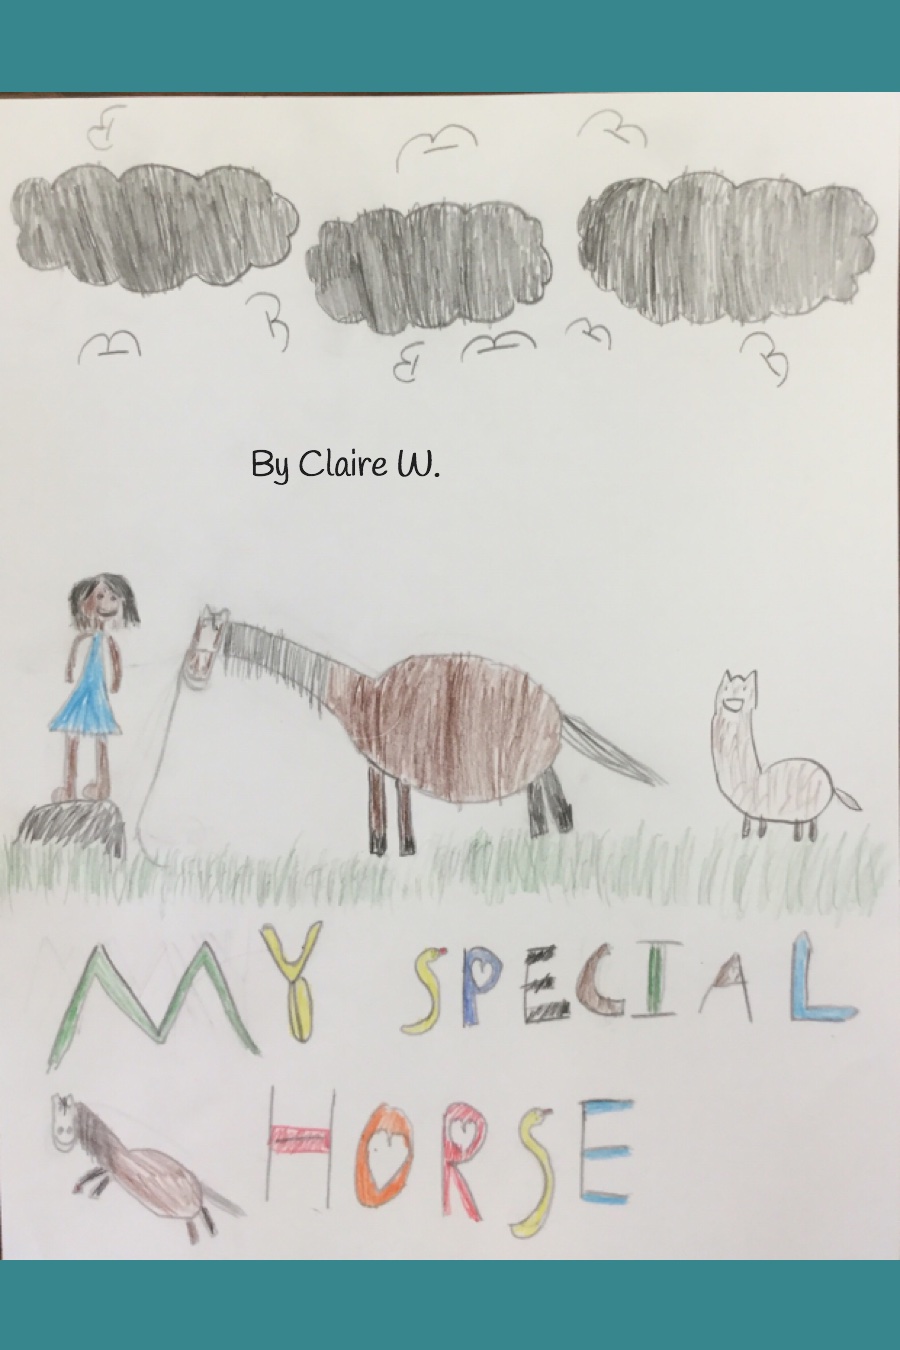 My Special Horse by Claire W